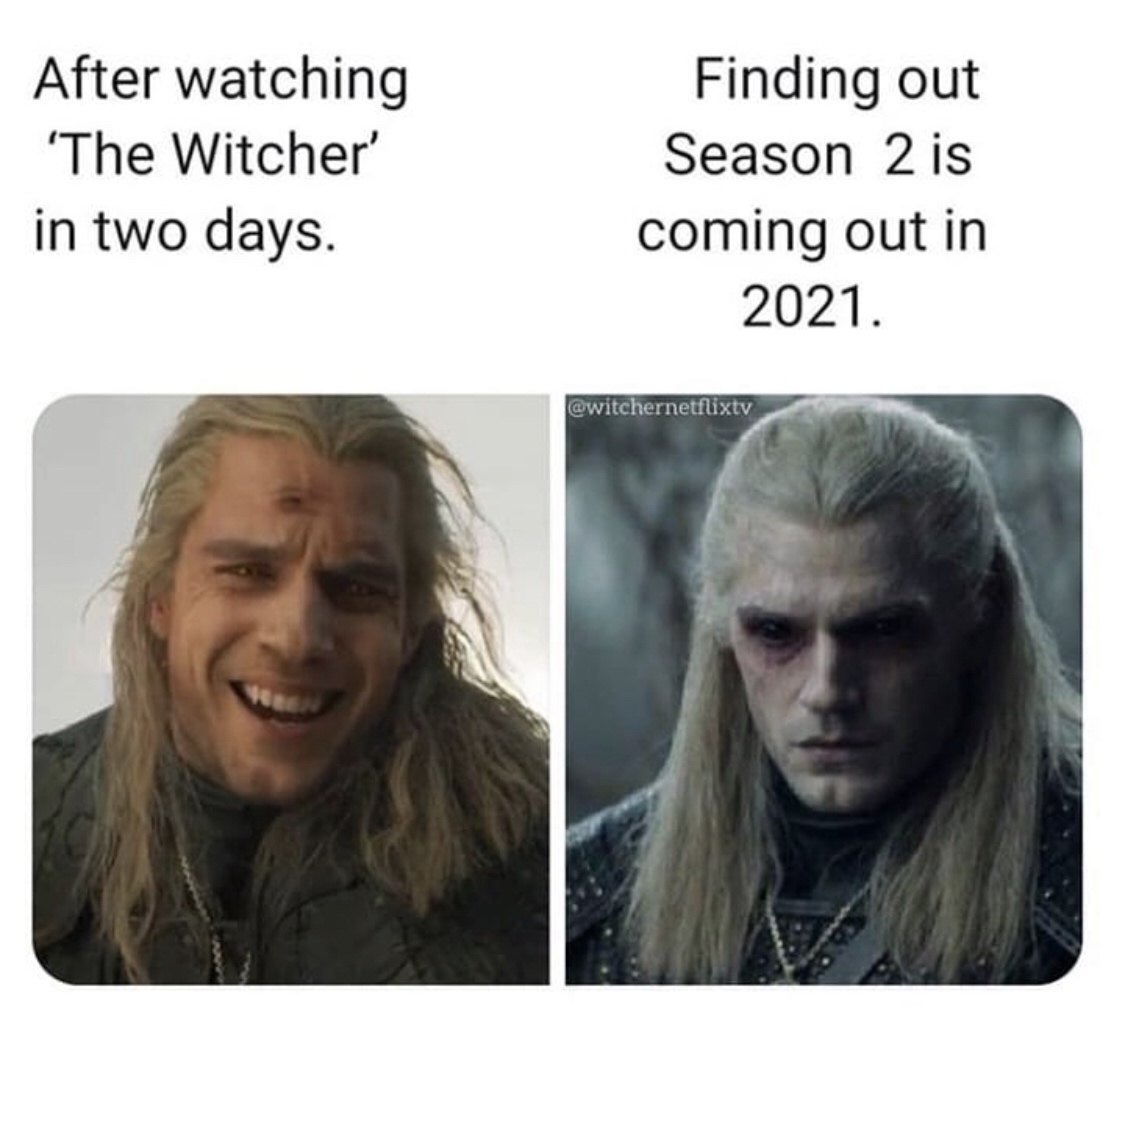 After watching 'The Witcher in two days. Finding out Season 2 is coming out in 2021.